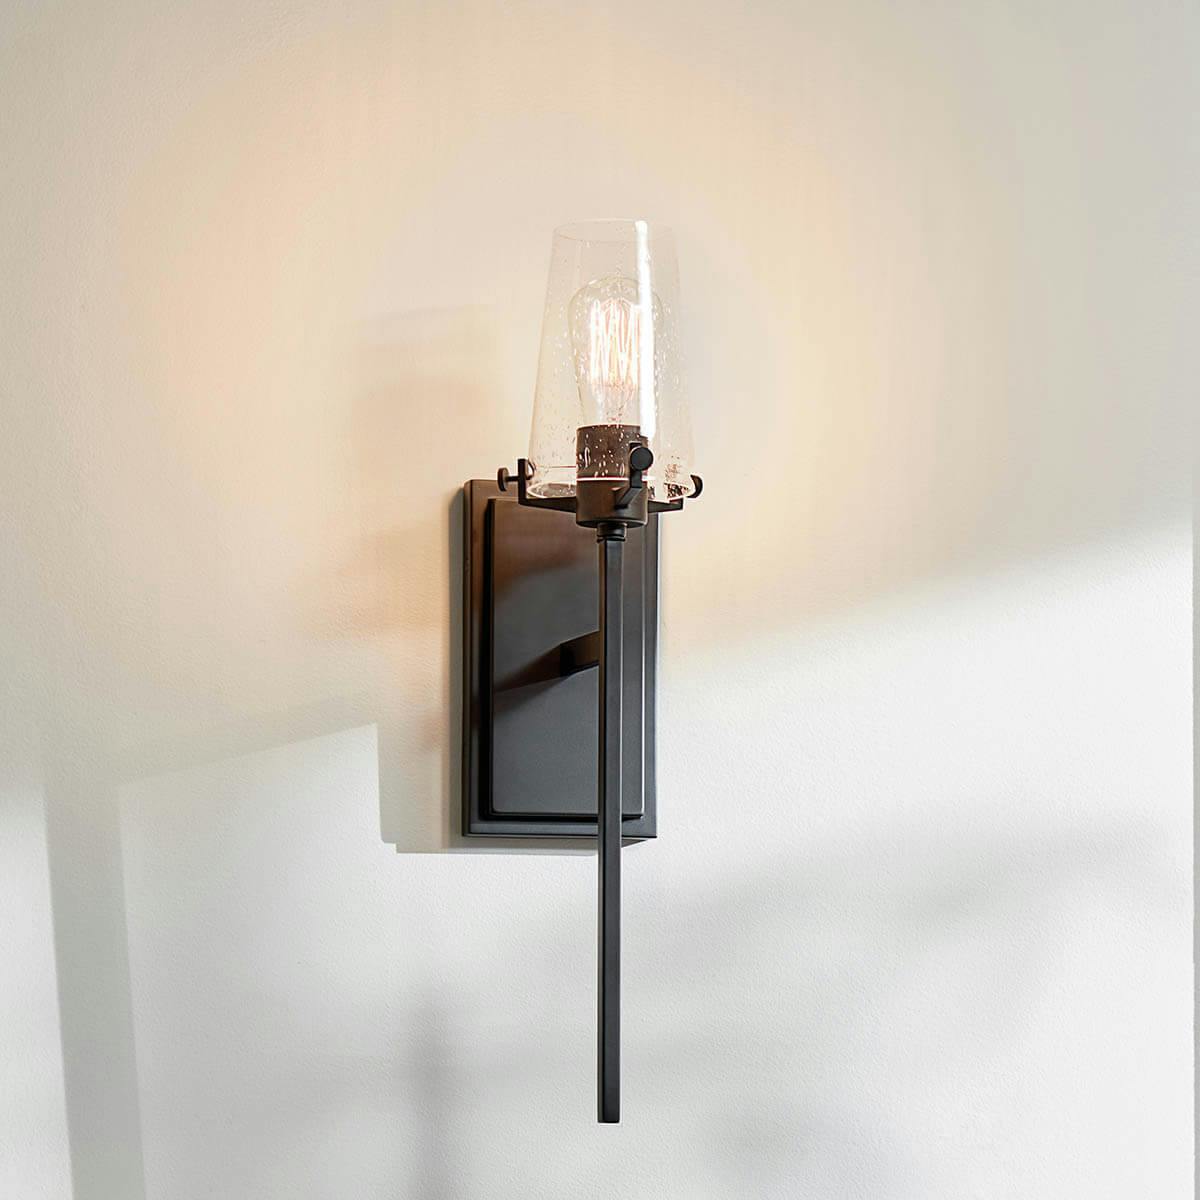 Day time dinin room with Alton 1 Light Wall Sconce Black